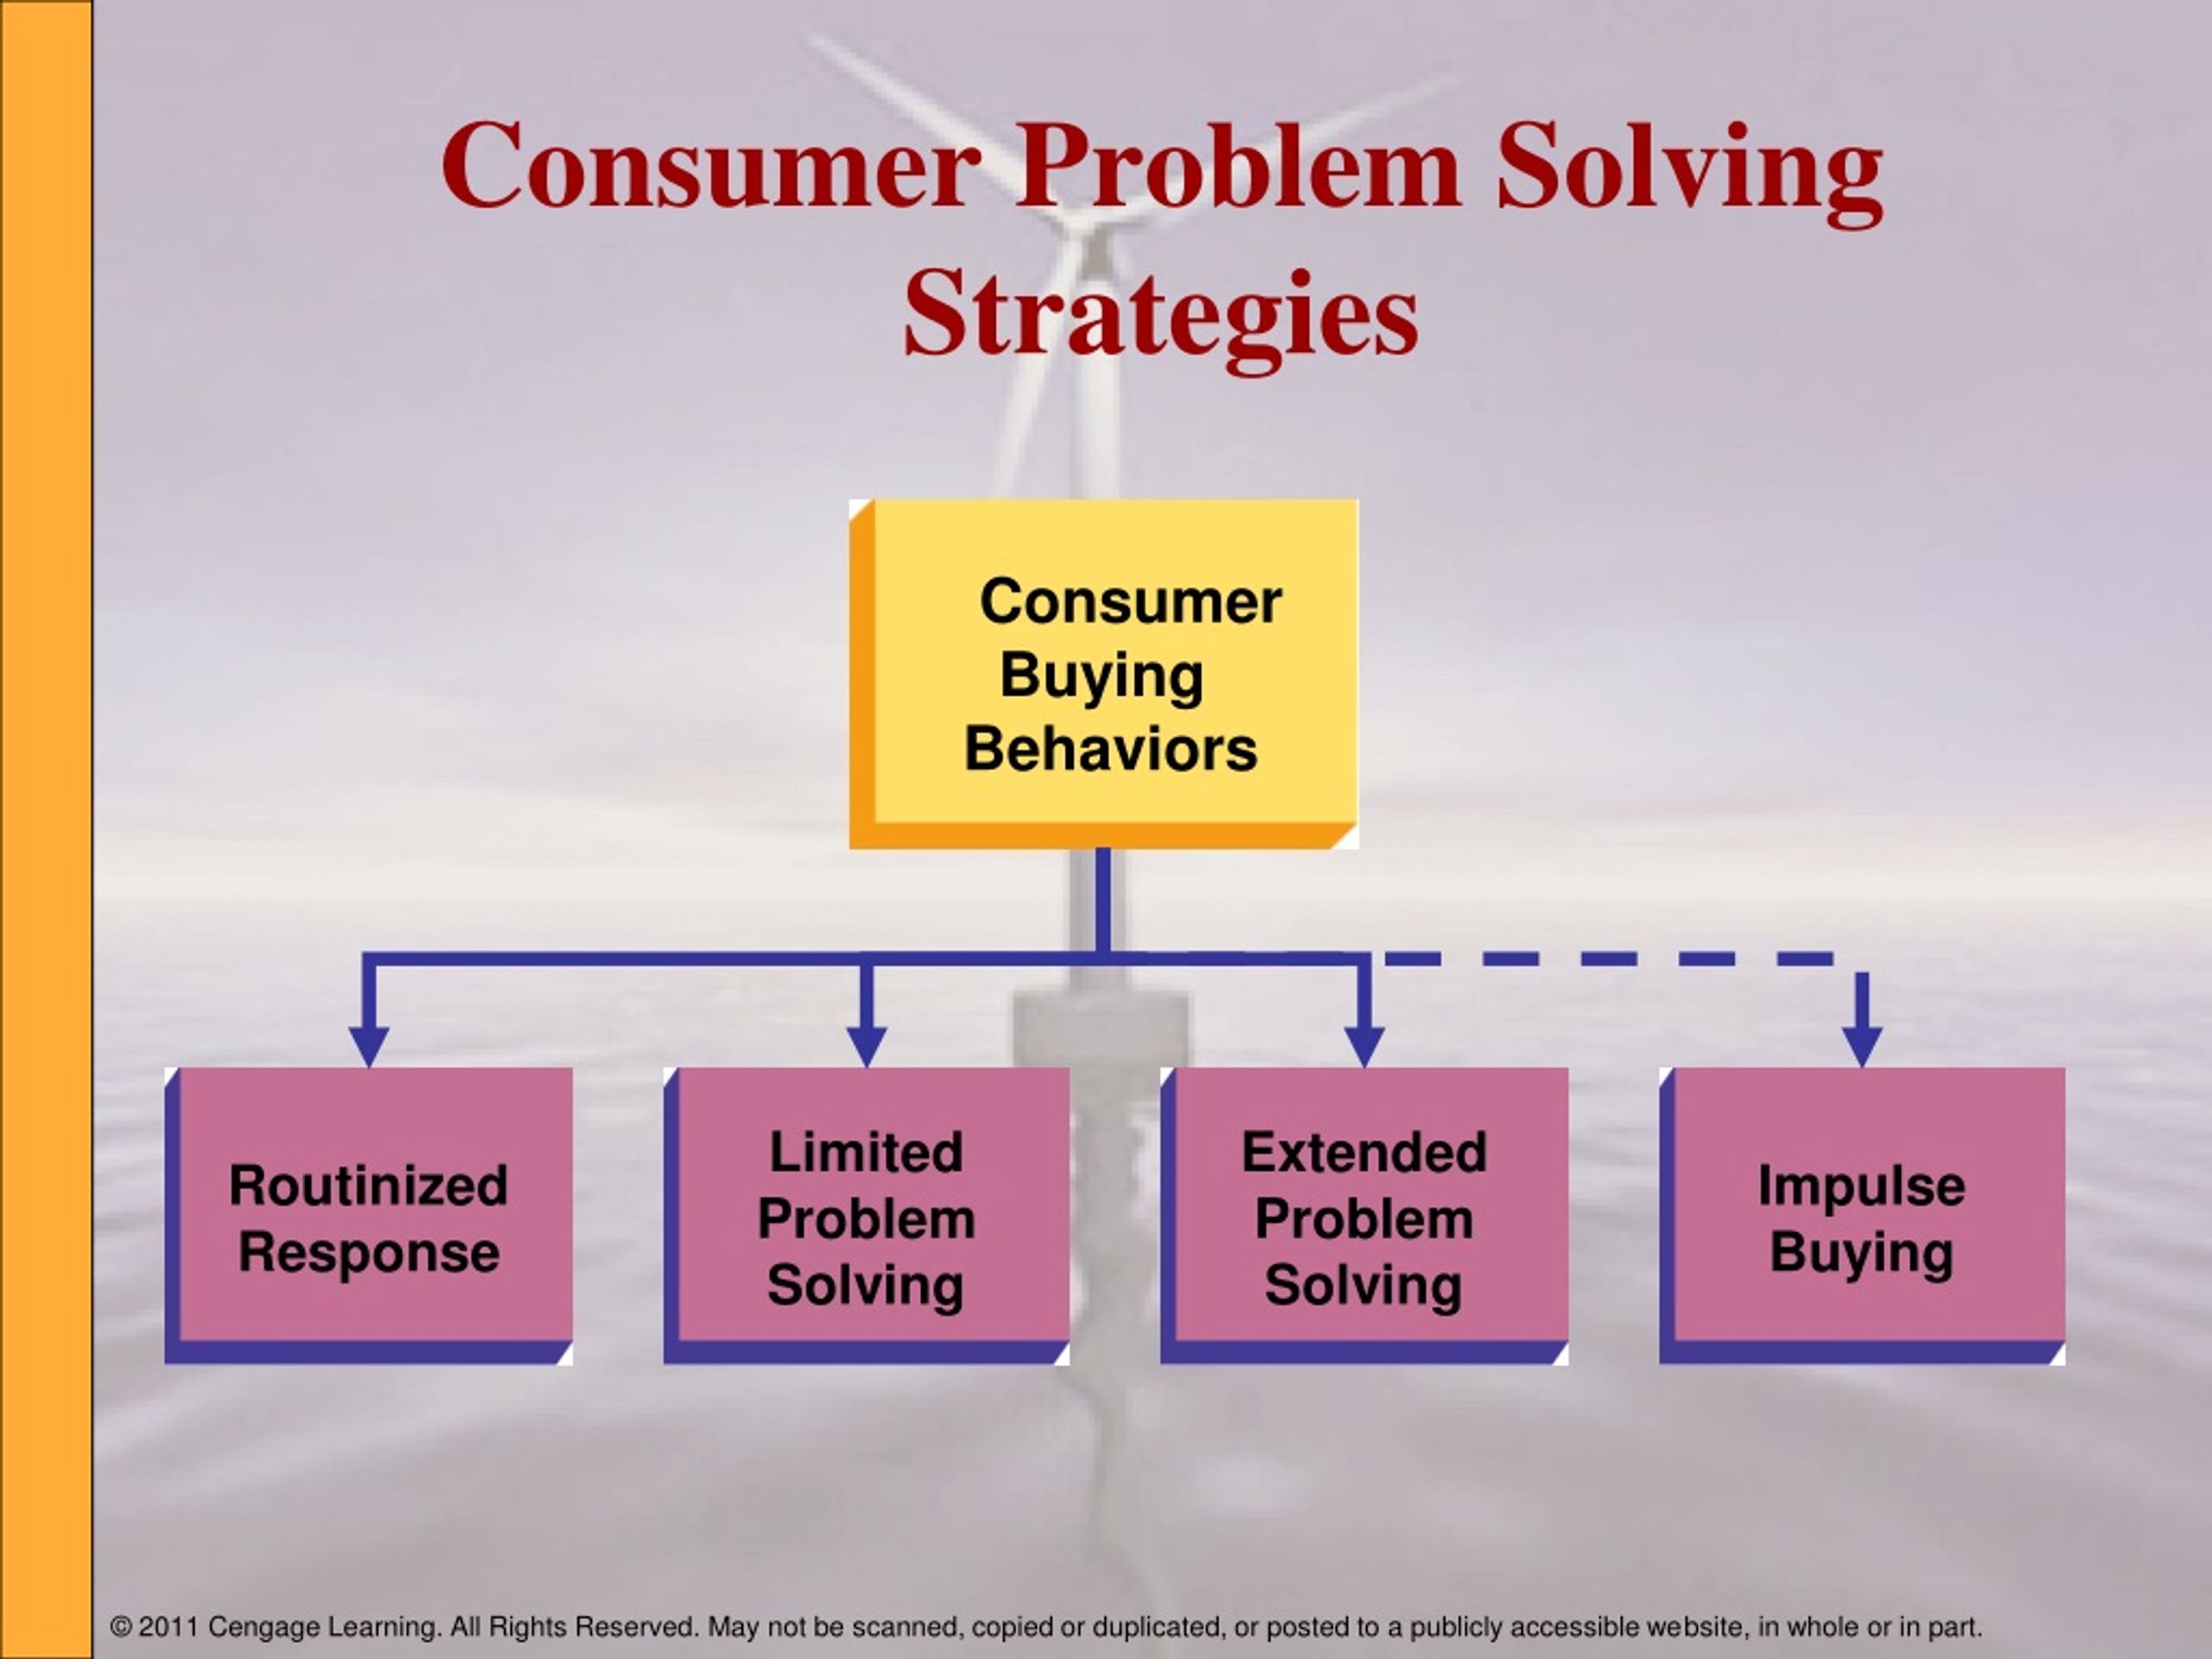 routinized response behavior is a consumer problem solving process used when buying